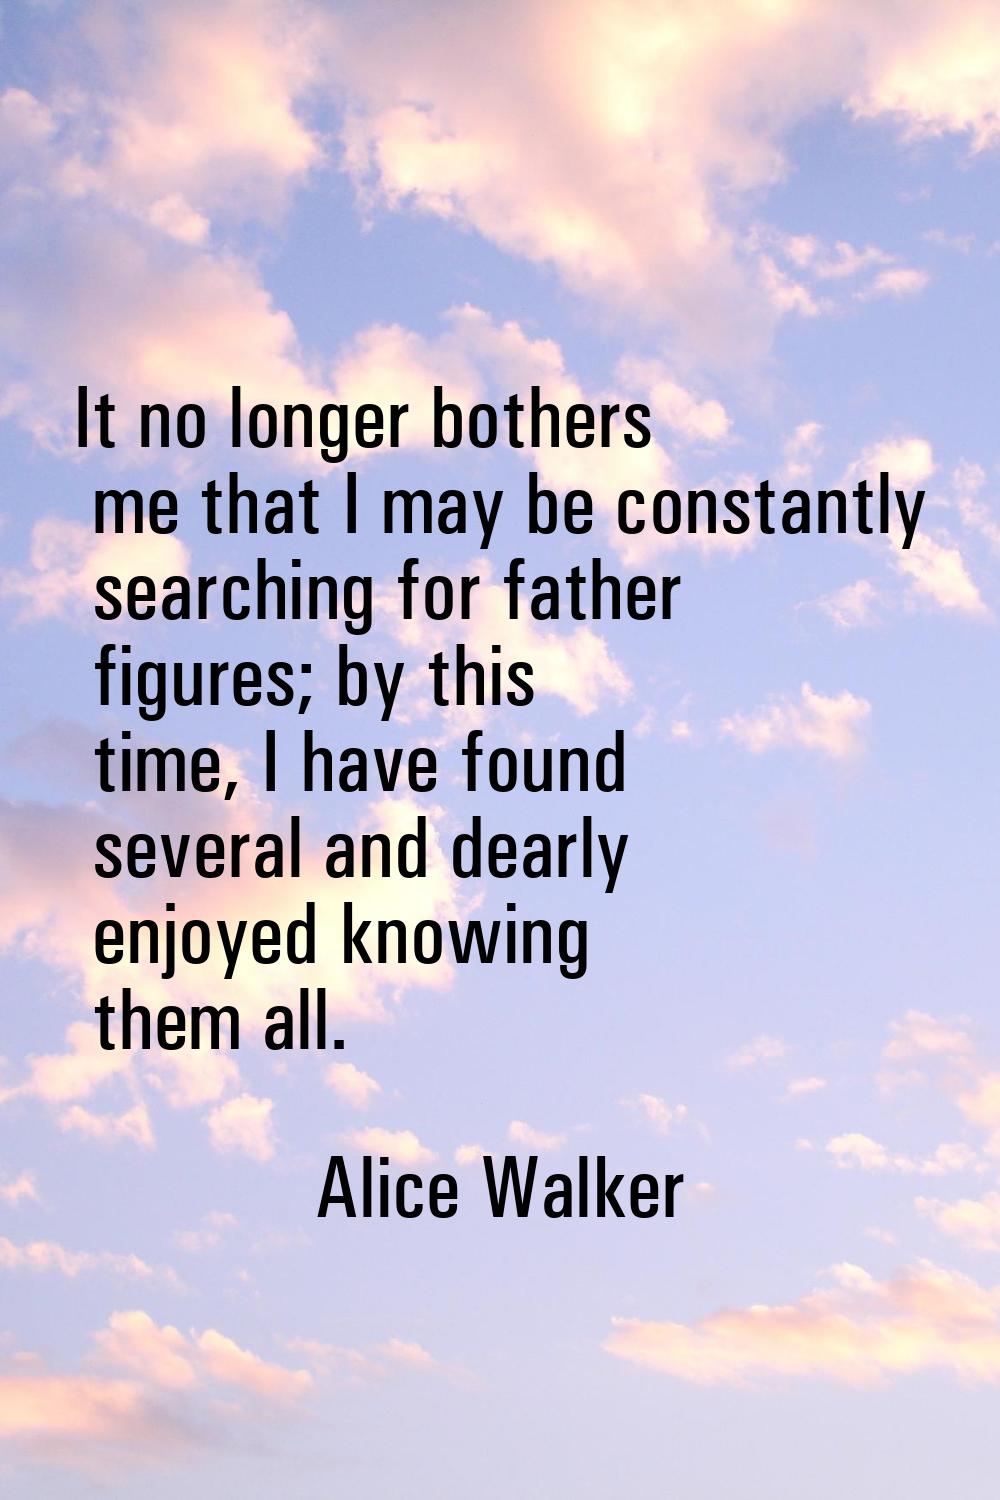 It no longer bothers me that I may be constantly searching for father figures; by this time, I have